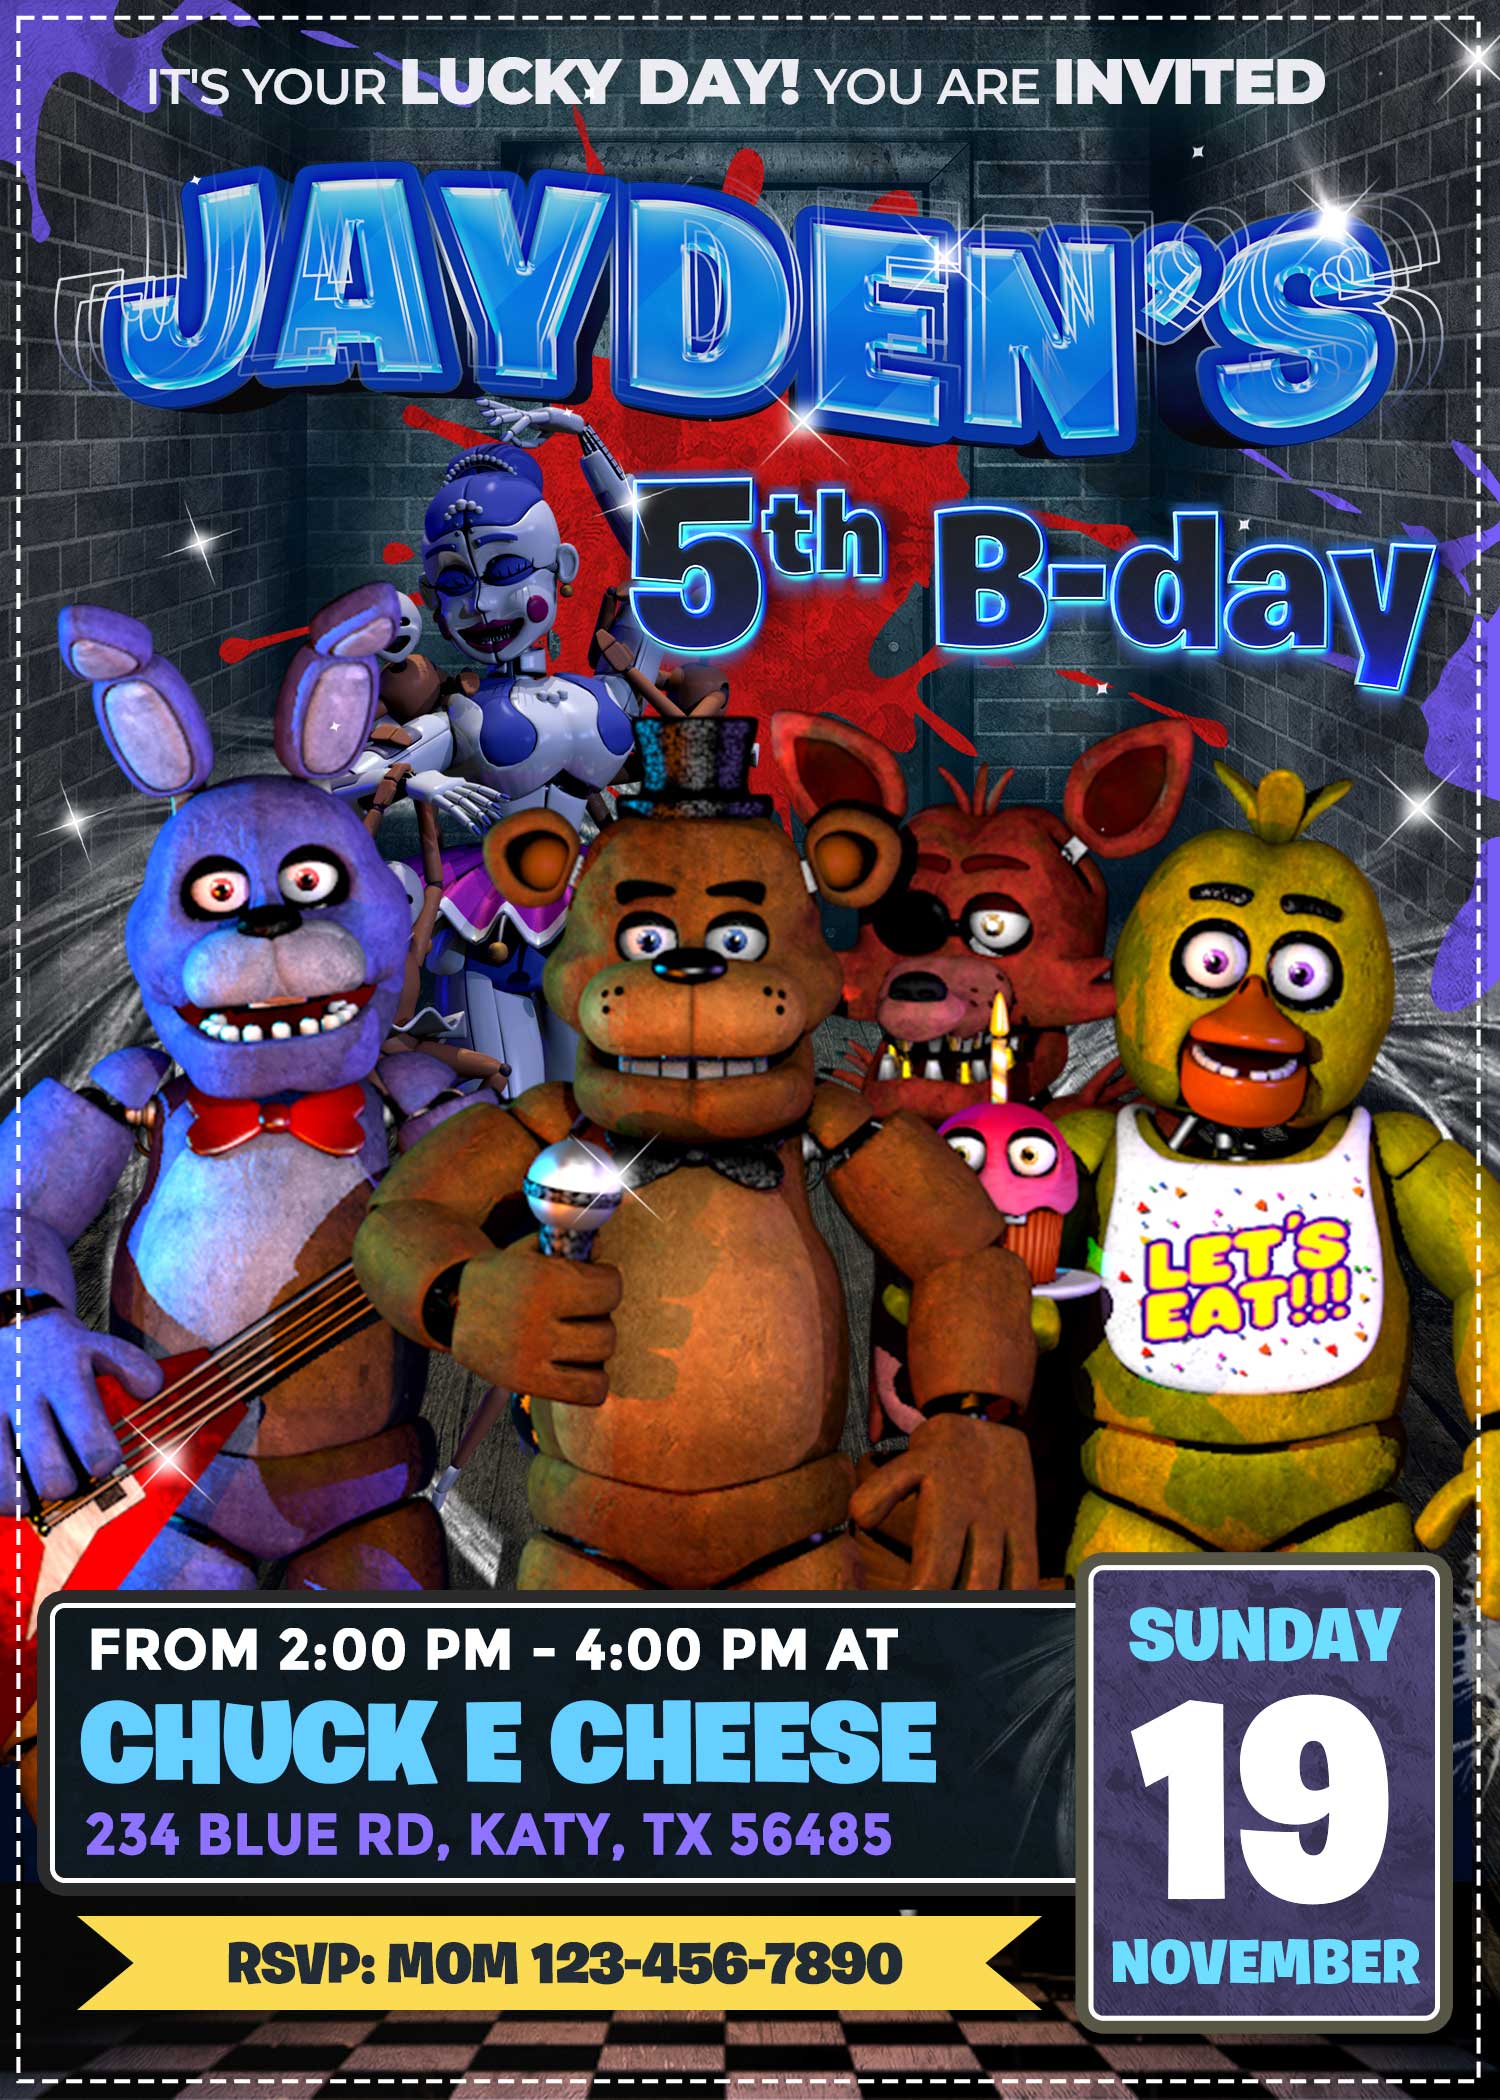 FREE PRINTABLE) - Five Night at Freddy's Party Kits Template  Five nights  at freddy's, Printable birthday invitations, Party kits